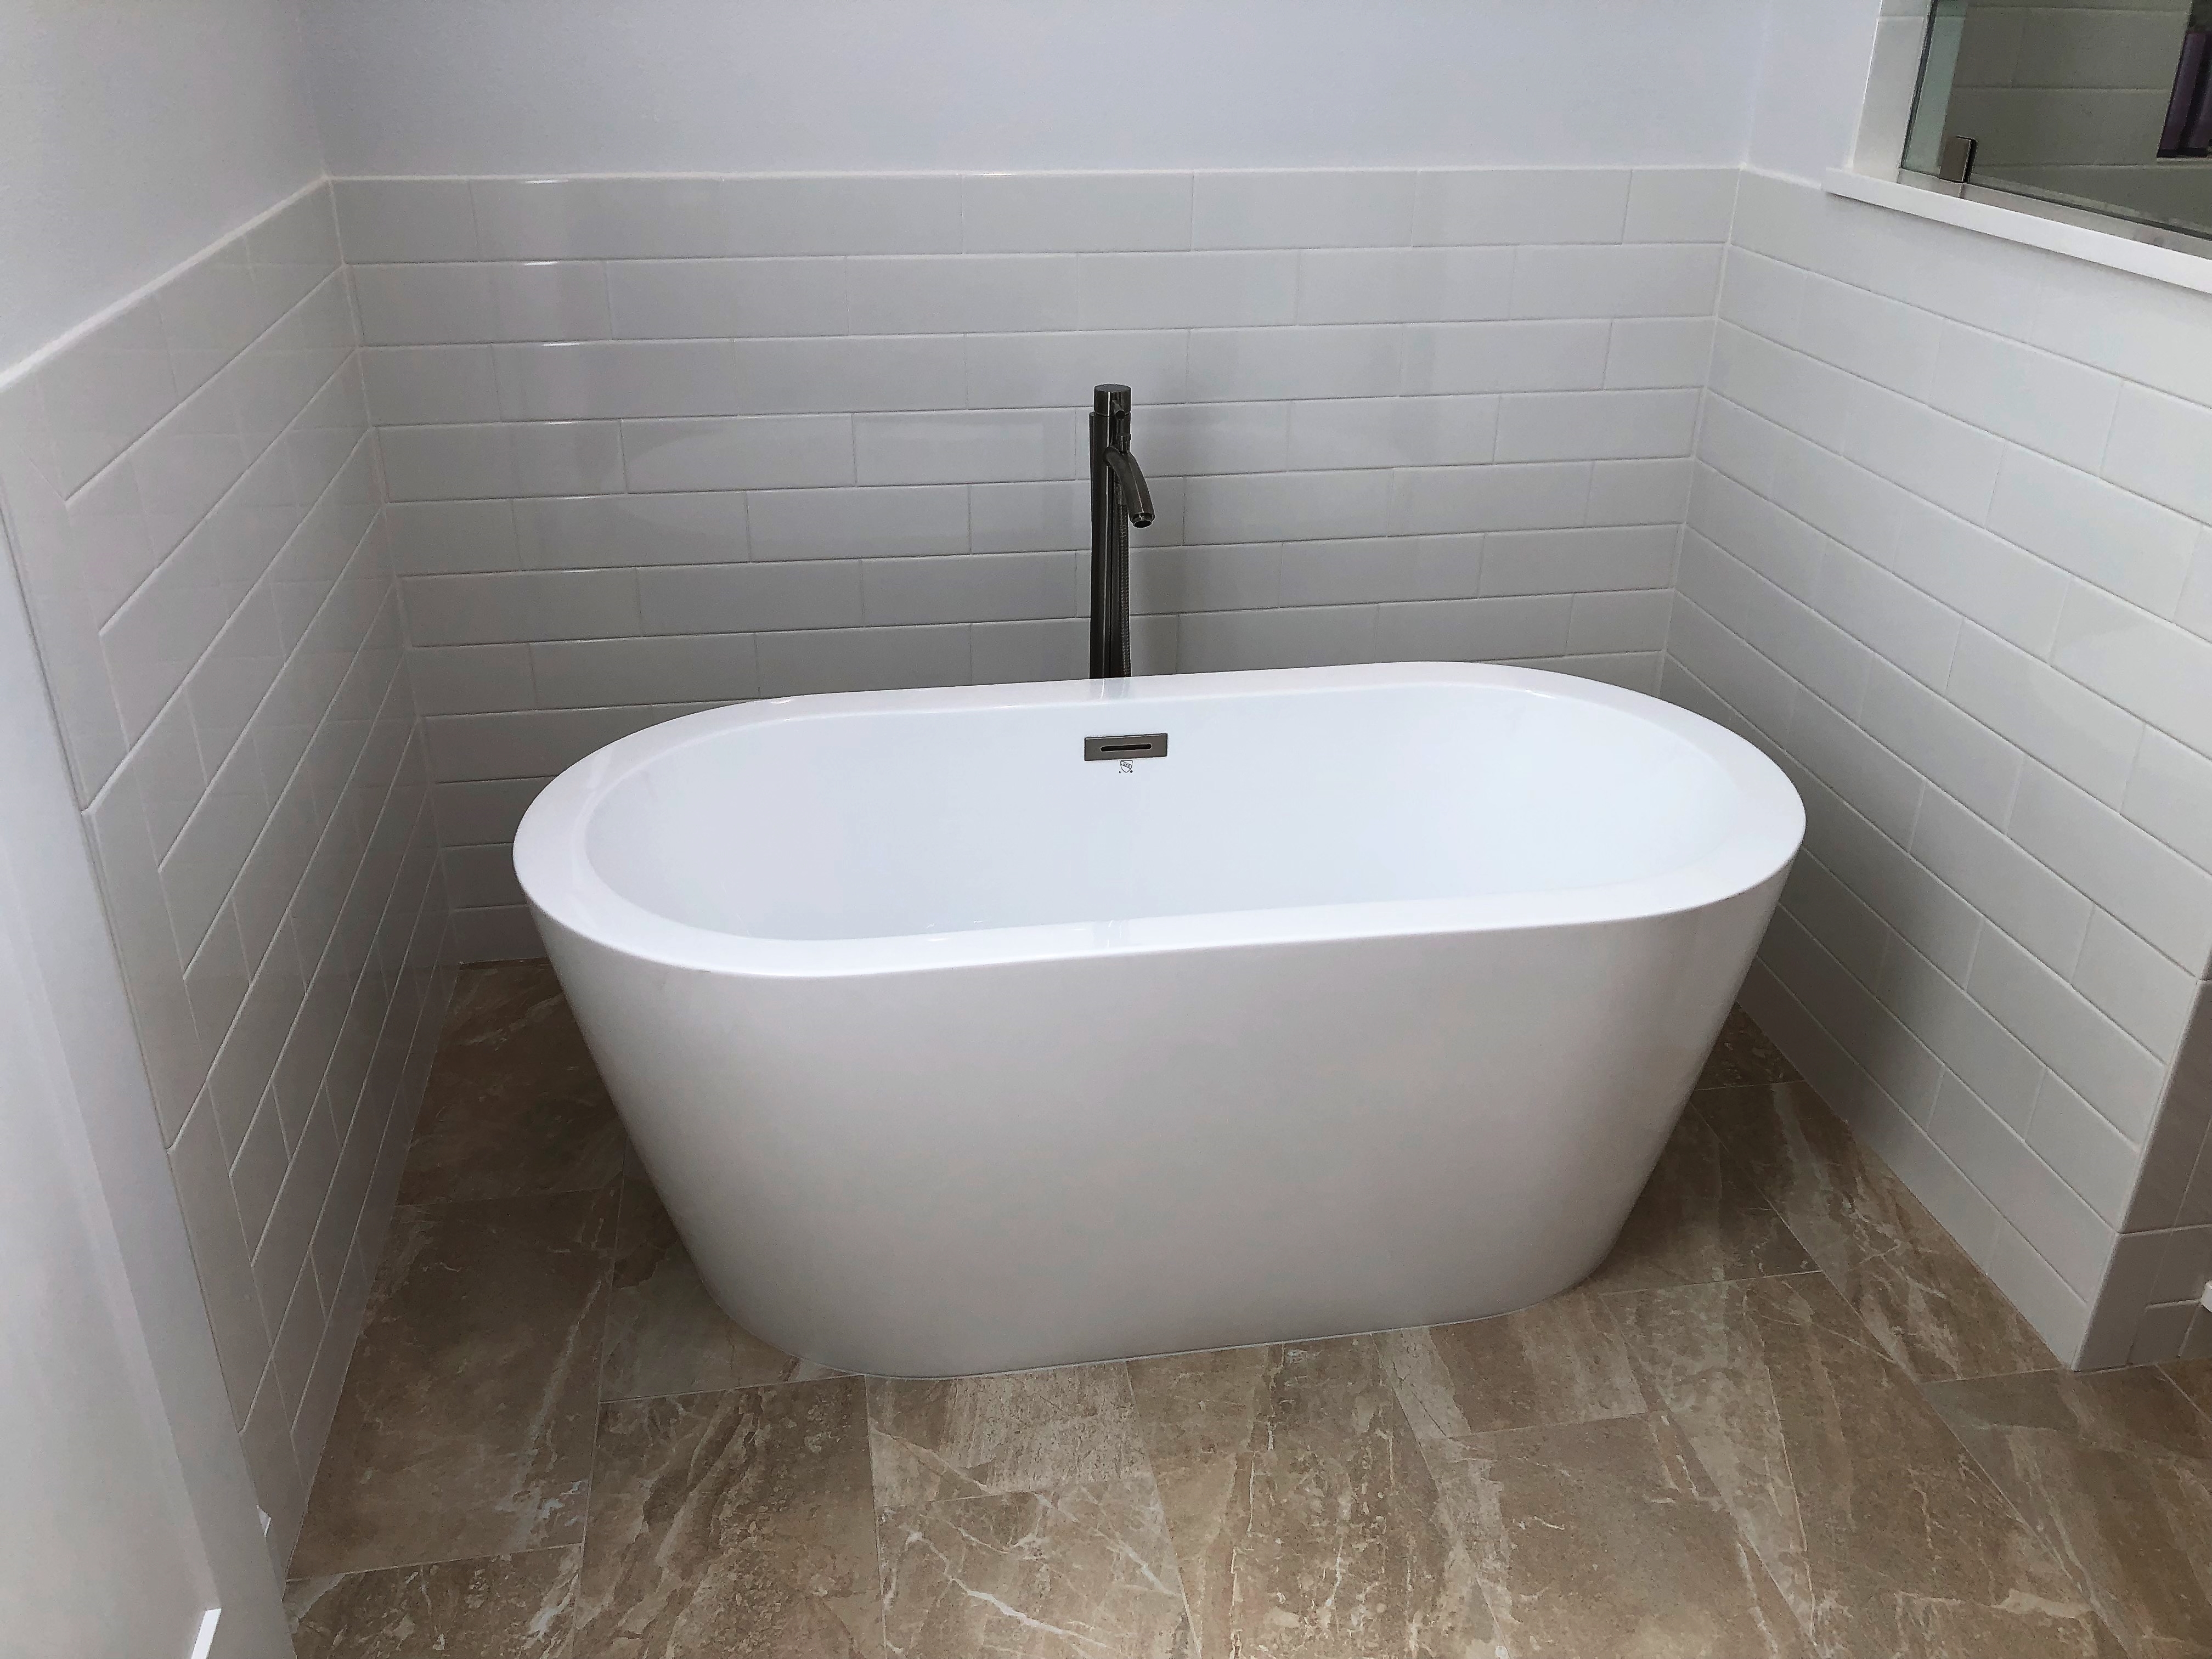 Free standing tub with white subway tile surround and Flint Ivory Tile flooring.